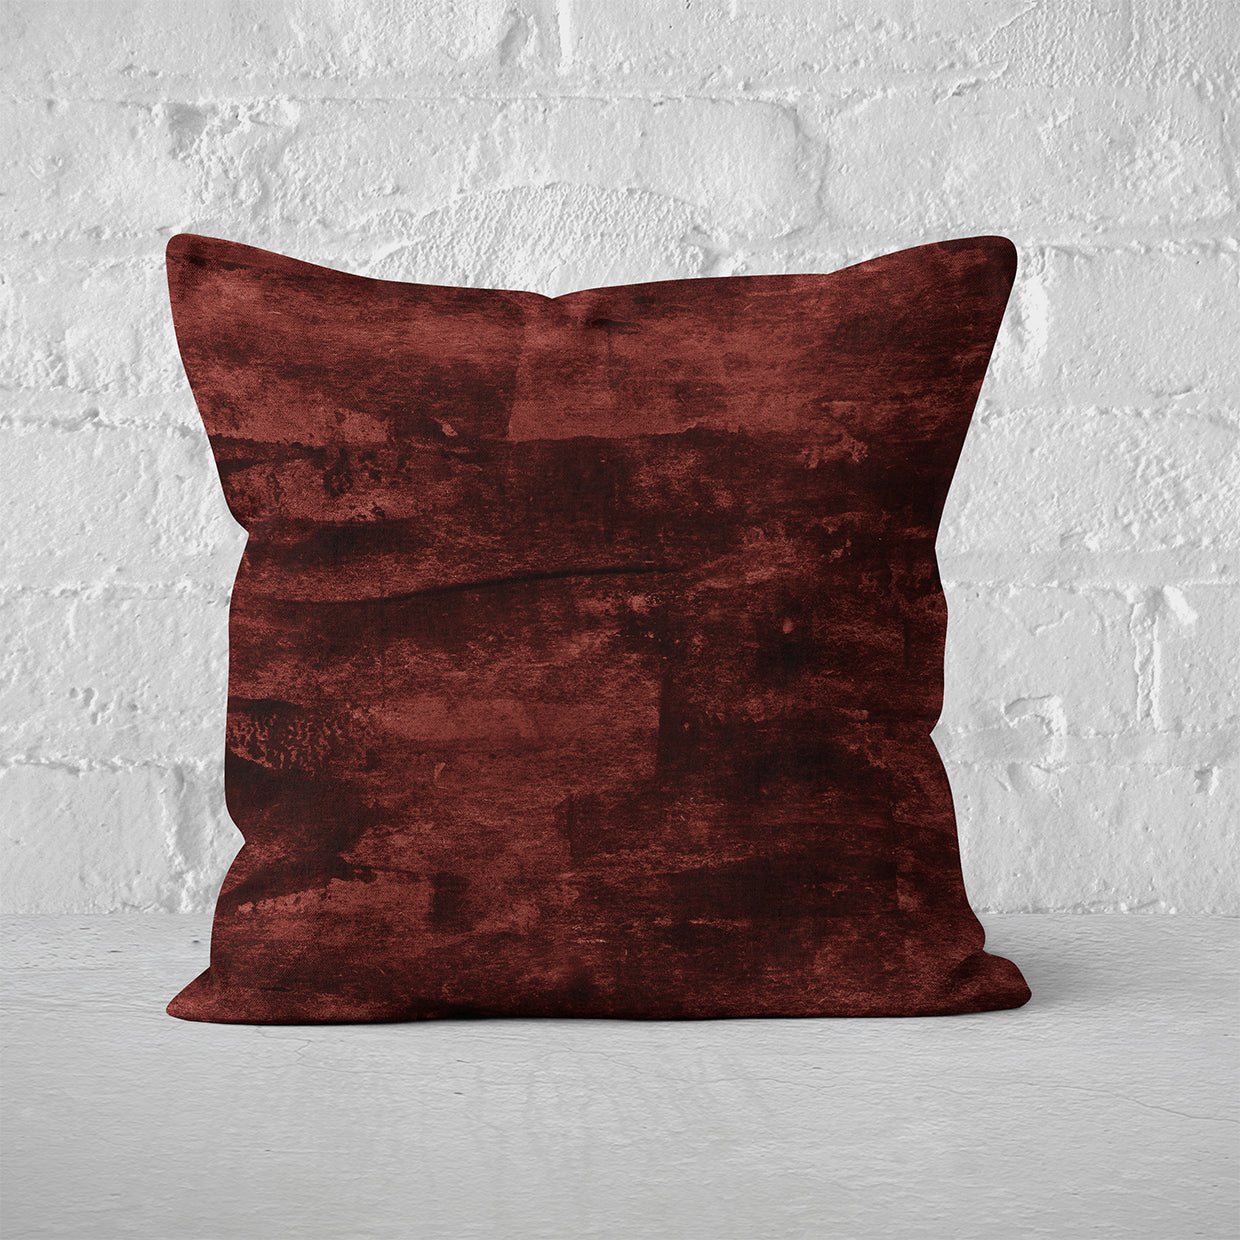 Pillow Cover Art Feature 'Satellite' - Black & Red - Cotton Twill